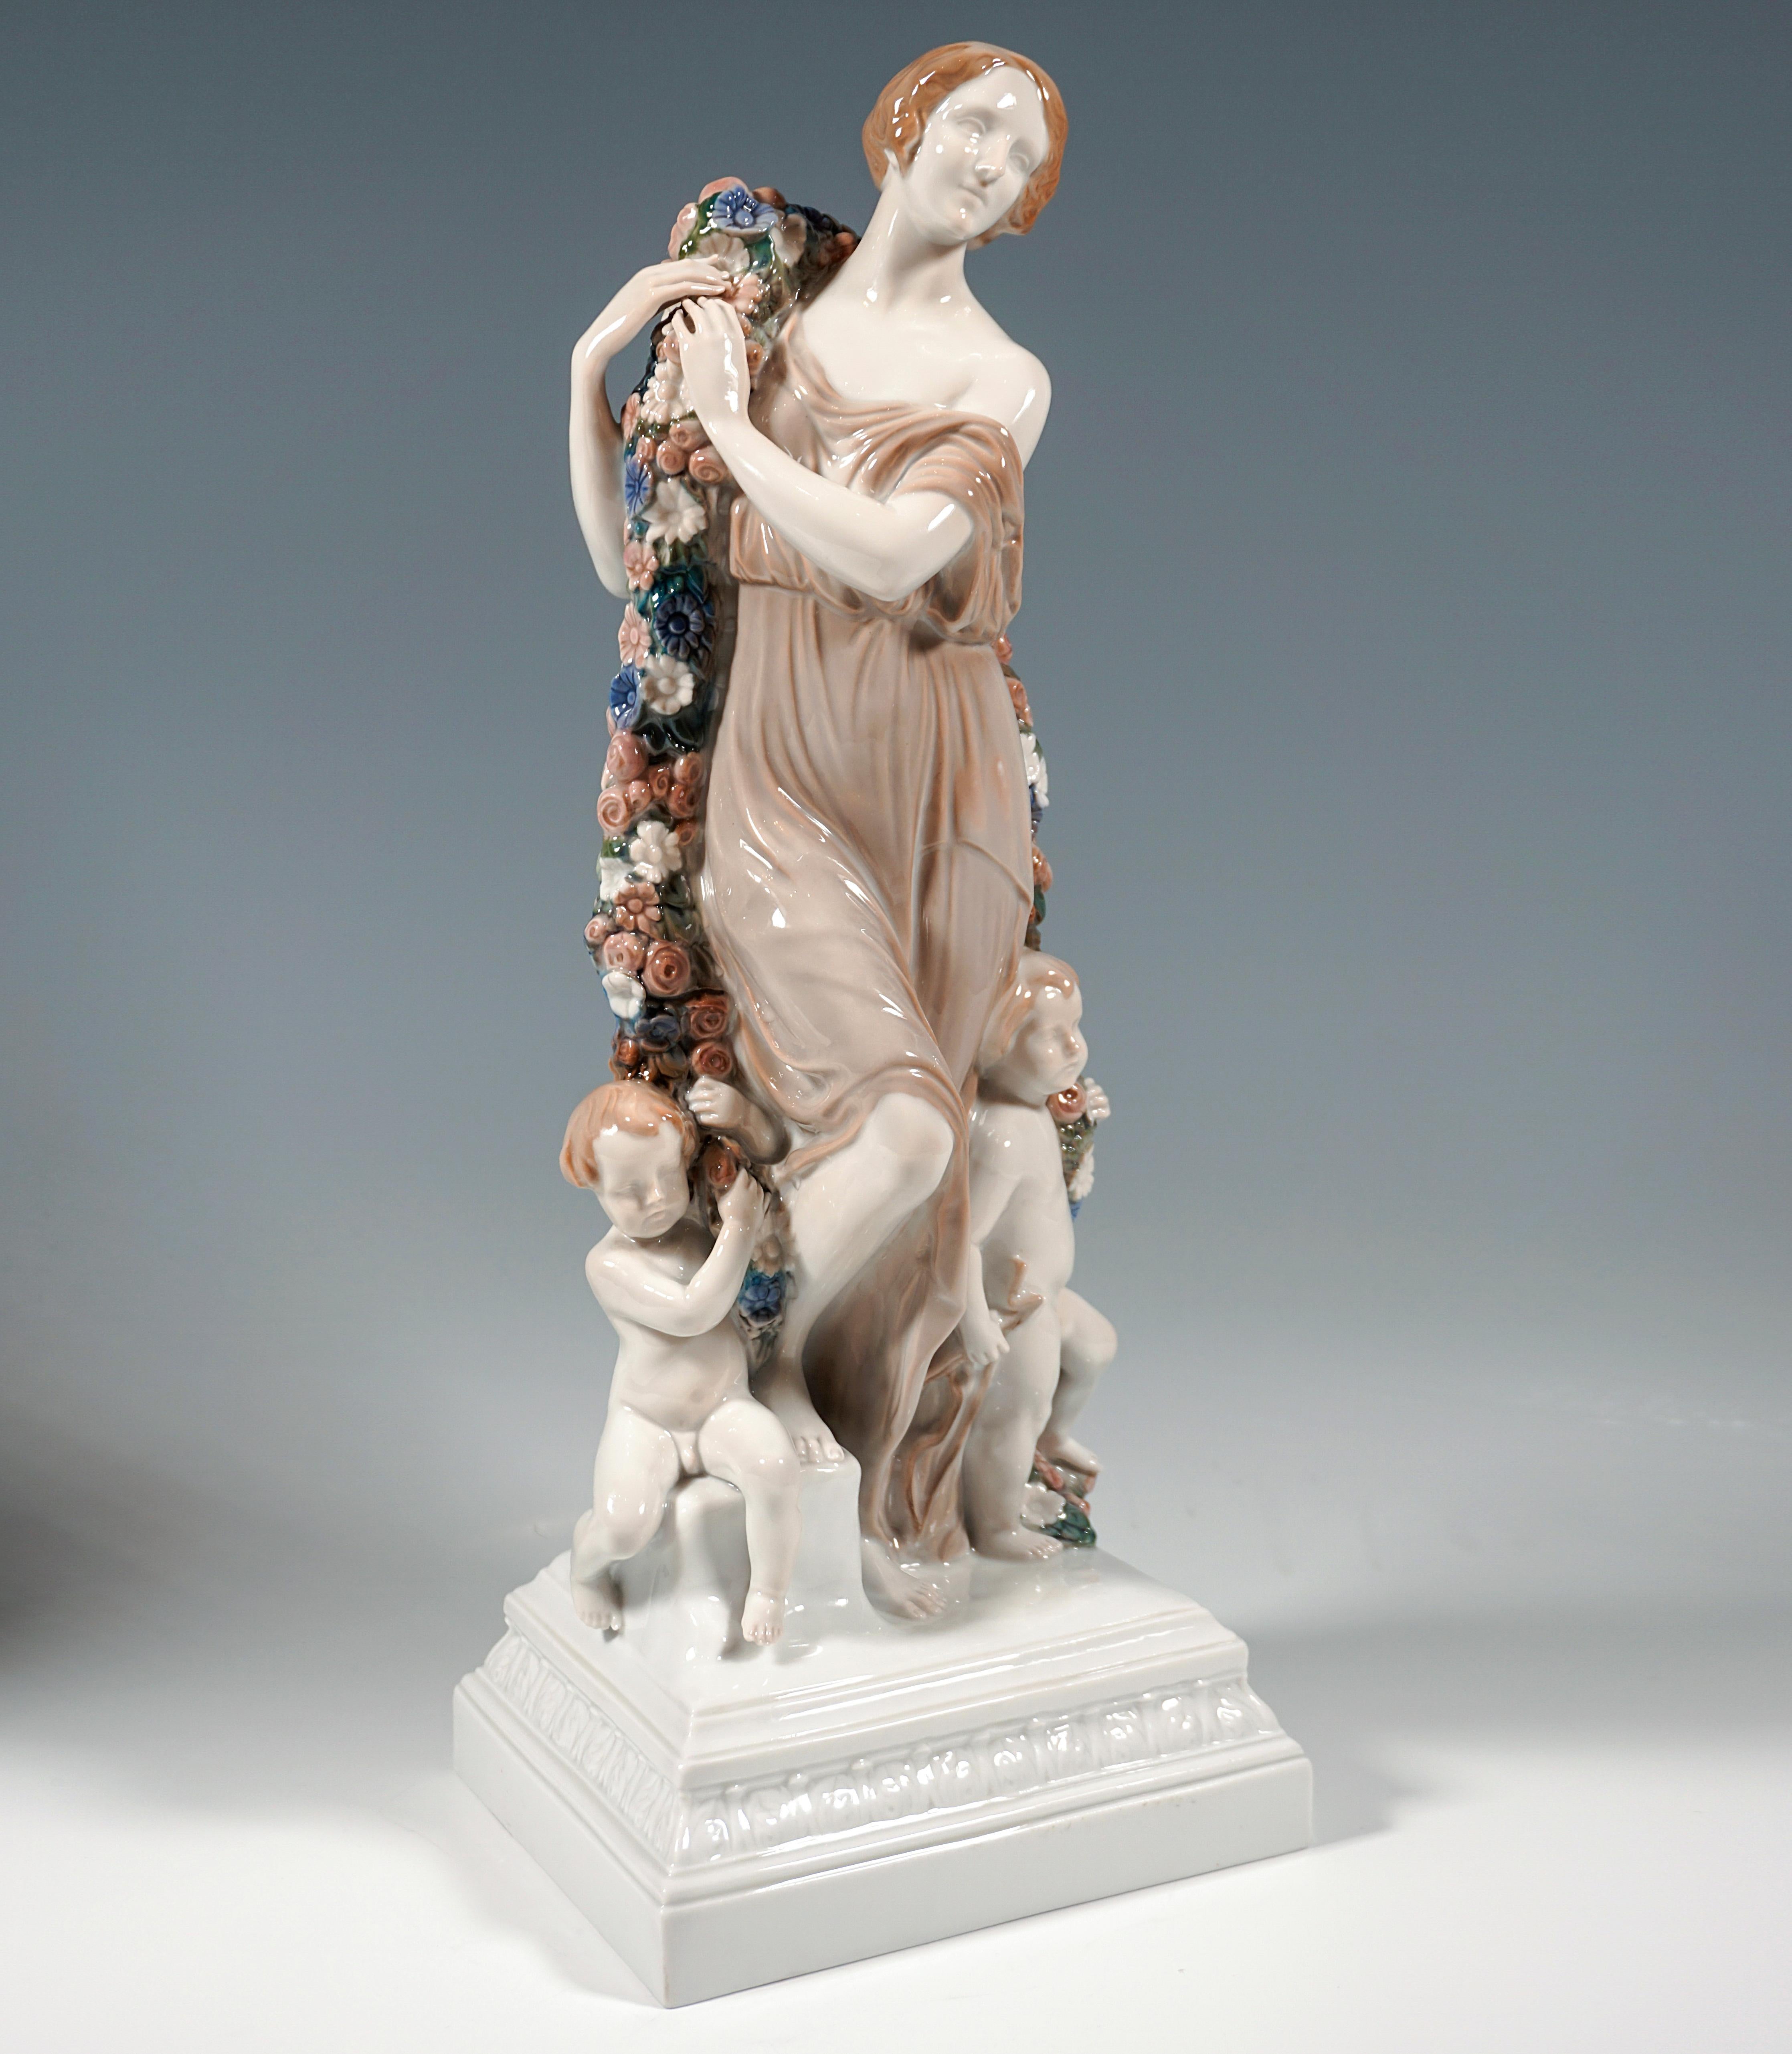 Extremely Rare Large Art Nouveau Group:
Monumental figure of Flora with chin-length hair in a long dress loosely embracing the beautiful body, her right foot resting on a low pedestal and holding with both hands a large, heavy garland of flowers